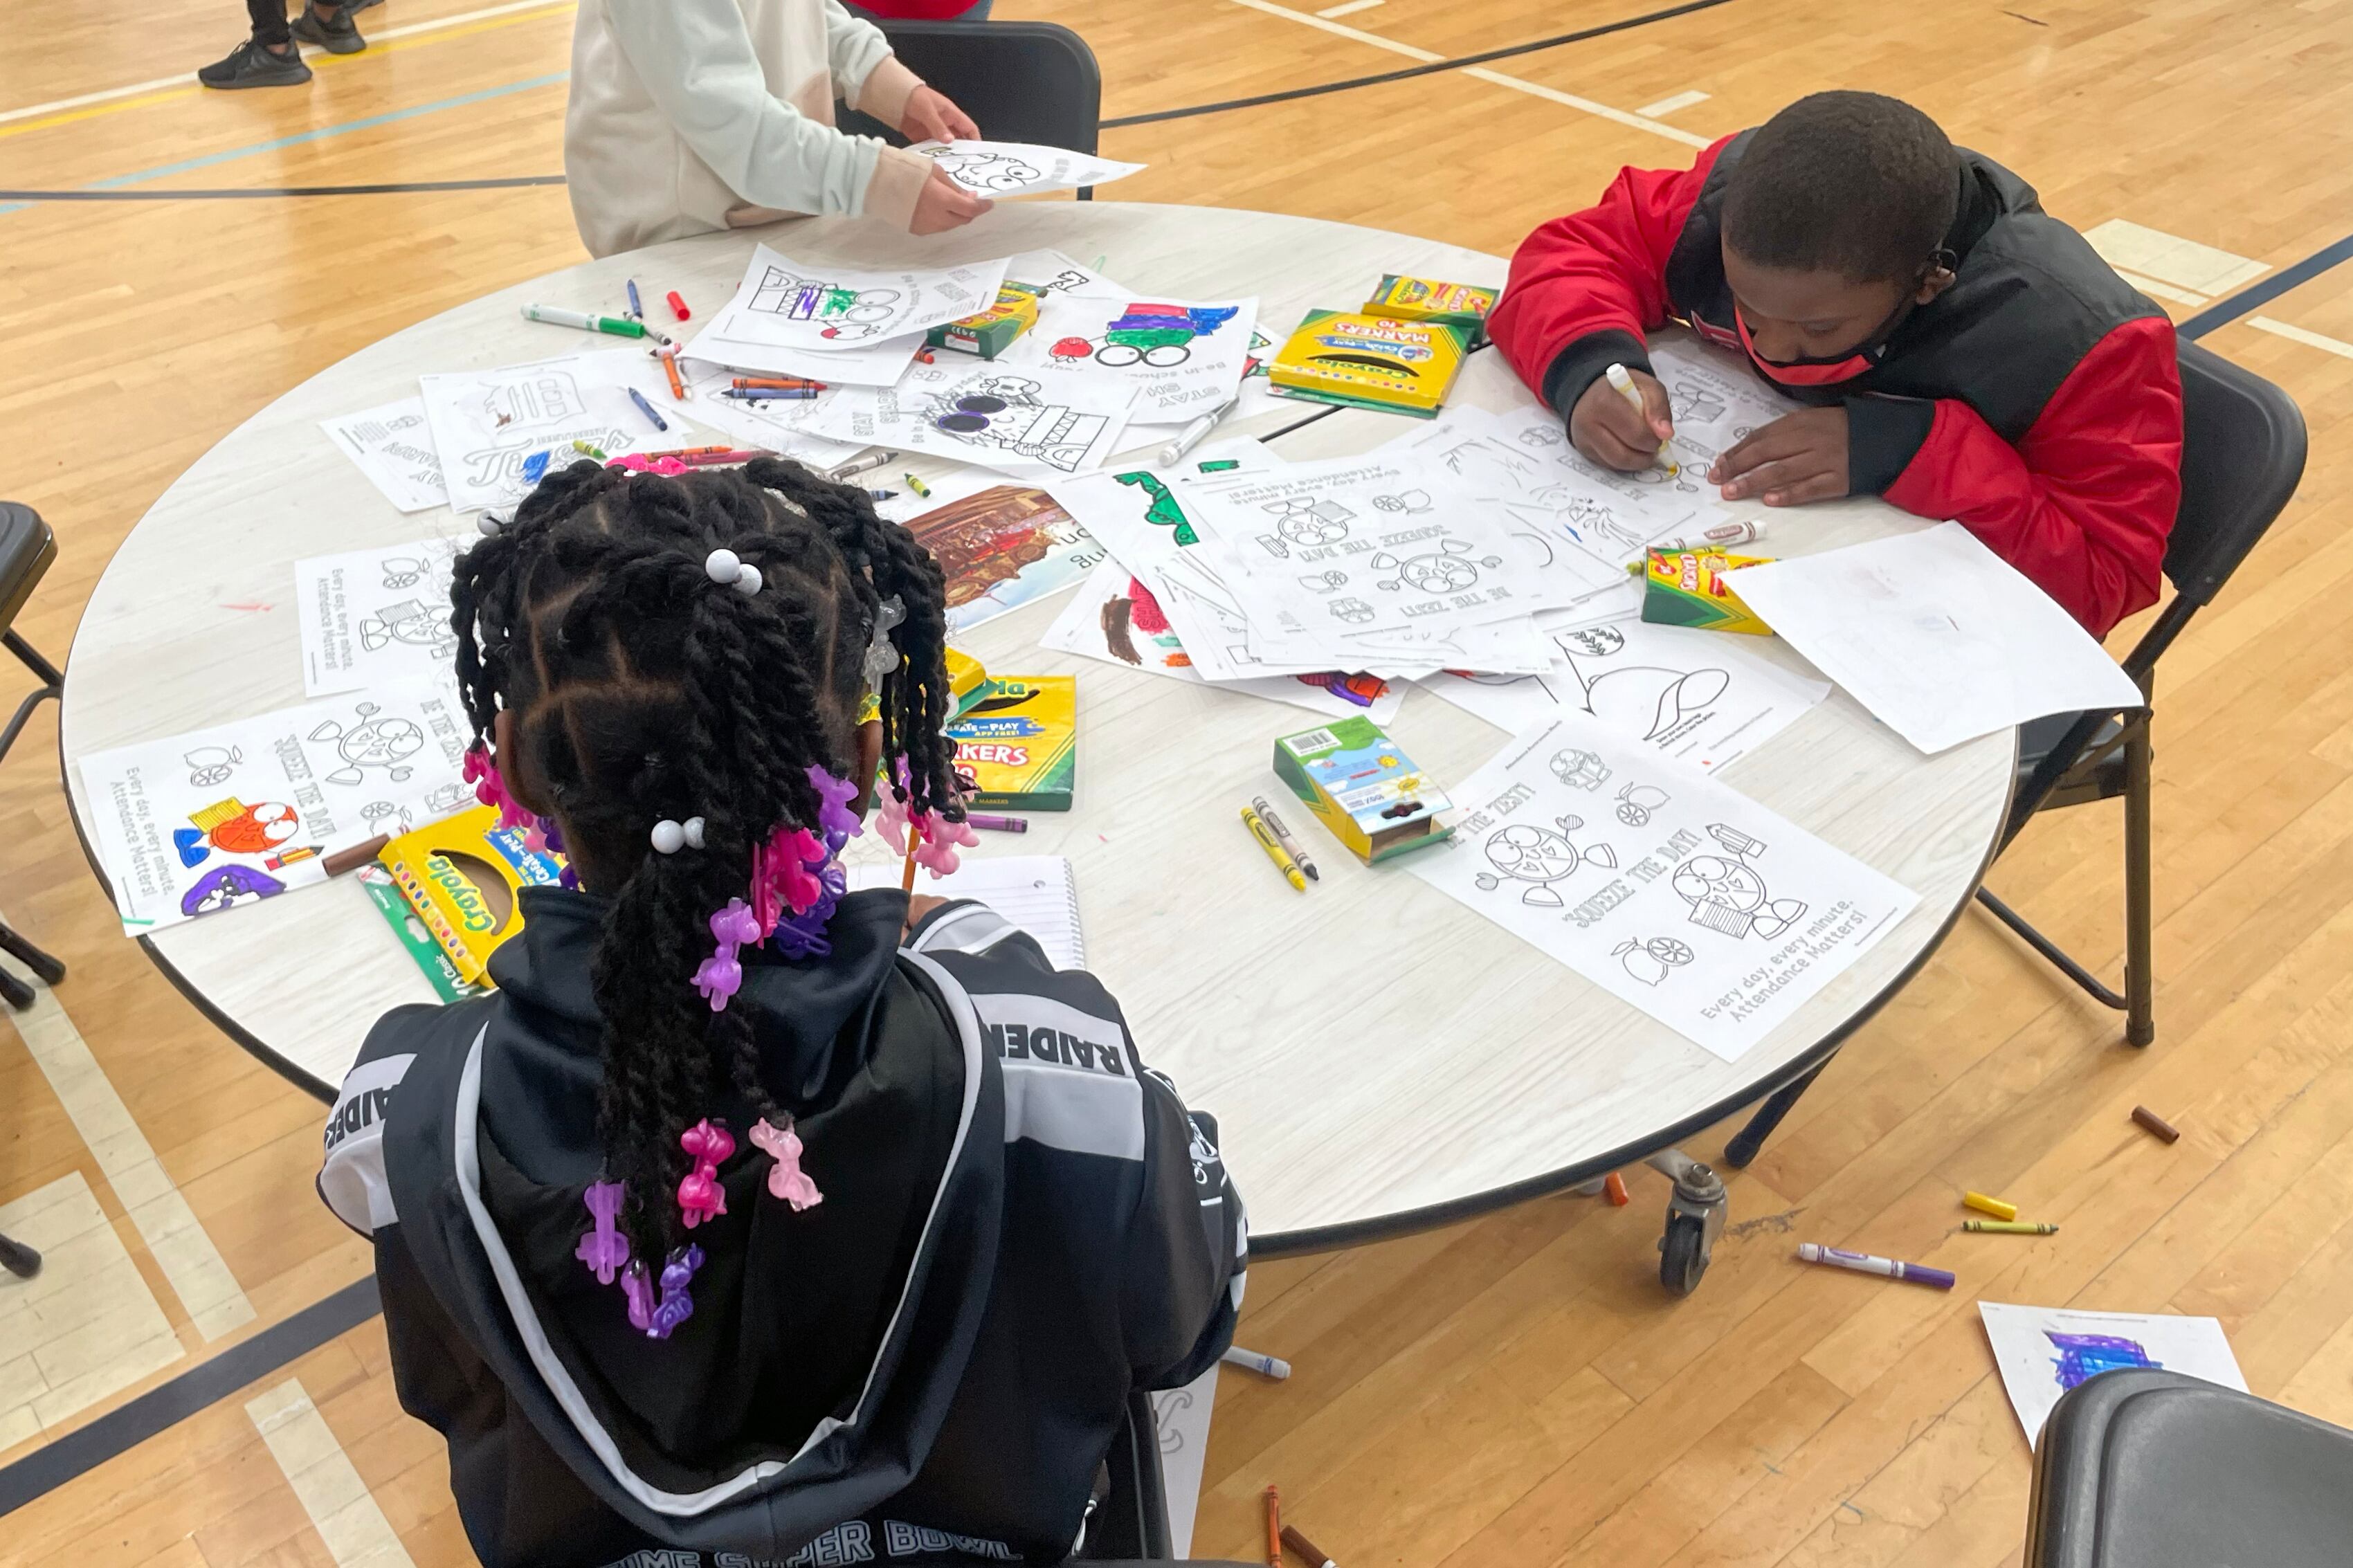 A bird’s eye view of three students seated around a round table, working with coloring pages and markers.